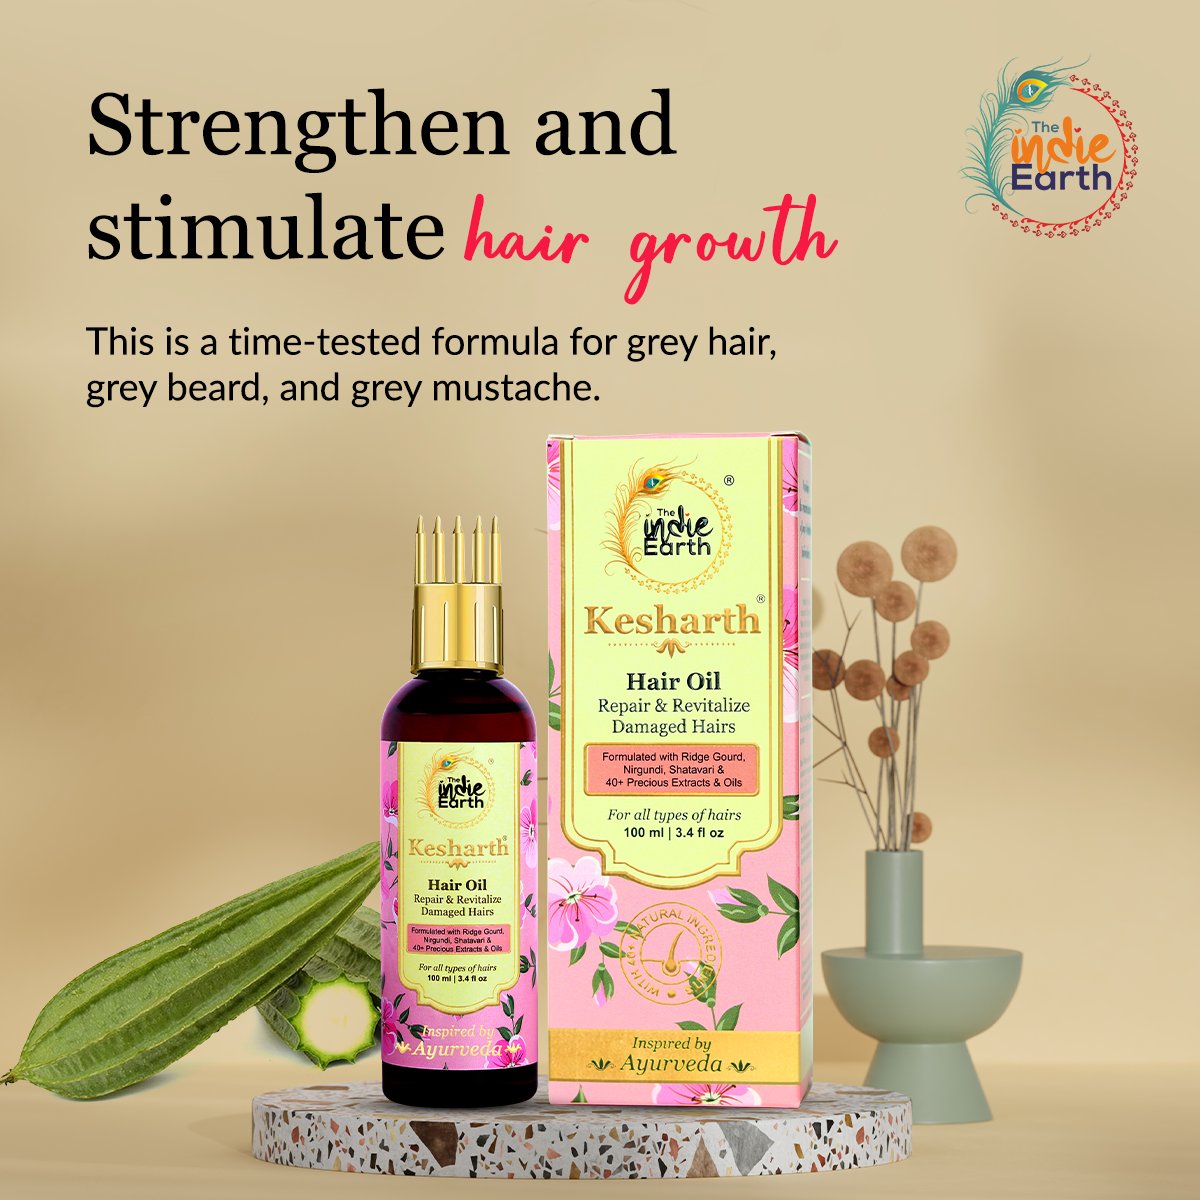 🛒 Buy Now: bit.ly/3y2ZIhU
#TheIndieEarth Kesharth Hair Oil contains Ridge Gourd oil along with 40+ other natural ingredients that help in preventing the greying of hair at an early age.
#hair #shampoo #hairoil #haircare #Kesharth #oilyskincare #hair #scalp #hairfall